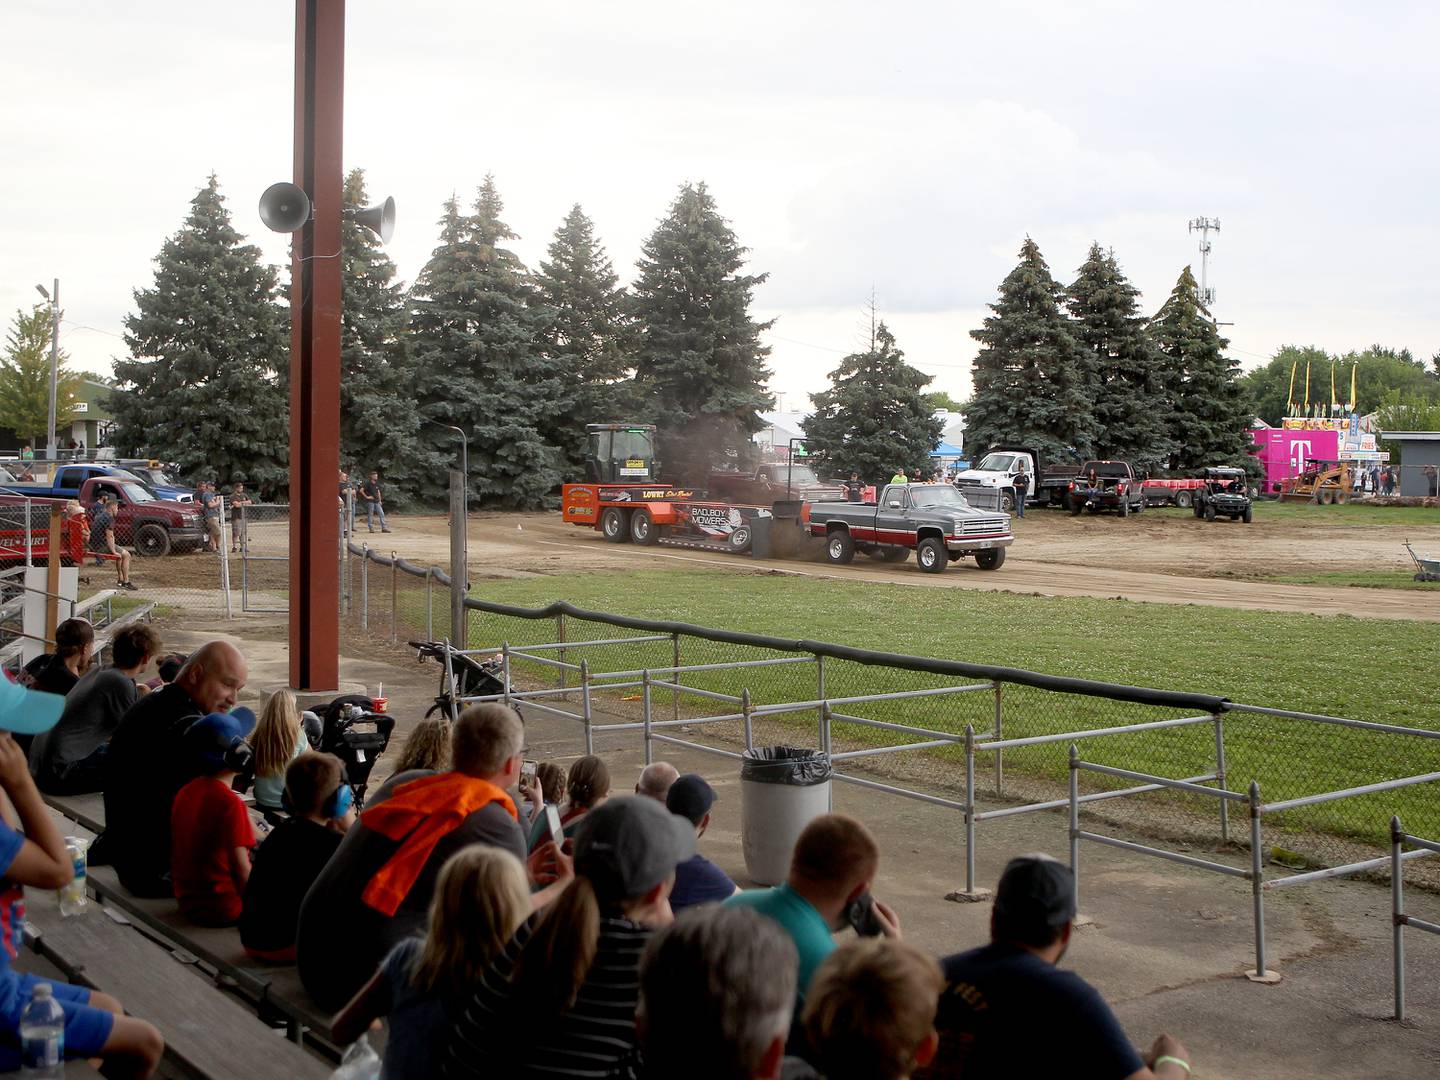 The Illini State Pullers tractor pull headlined at the Grandstand during the 2021 Kane County Fair in St. Charles on Thursday, July 15, 2021.